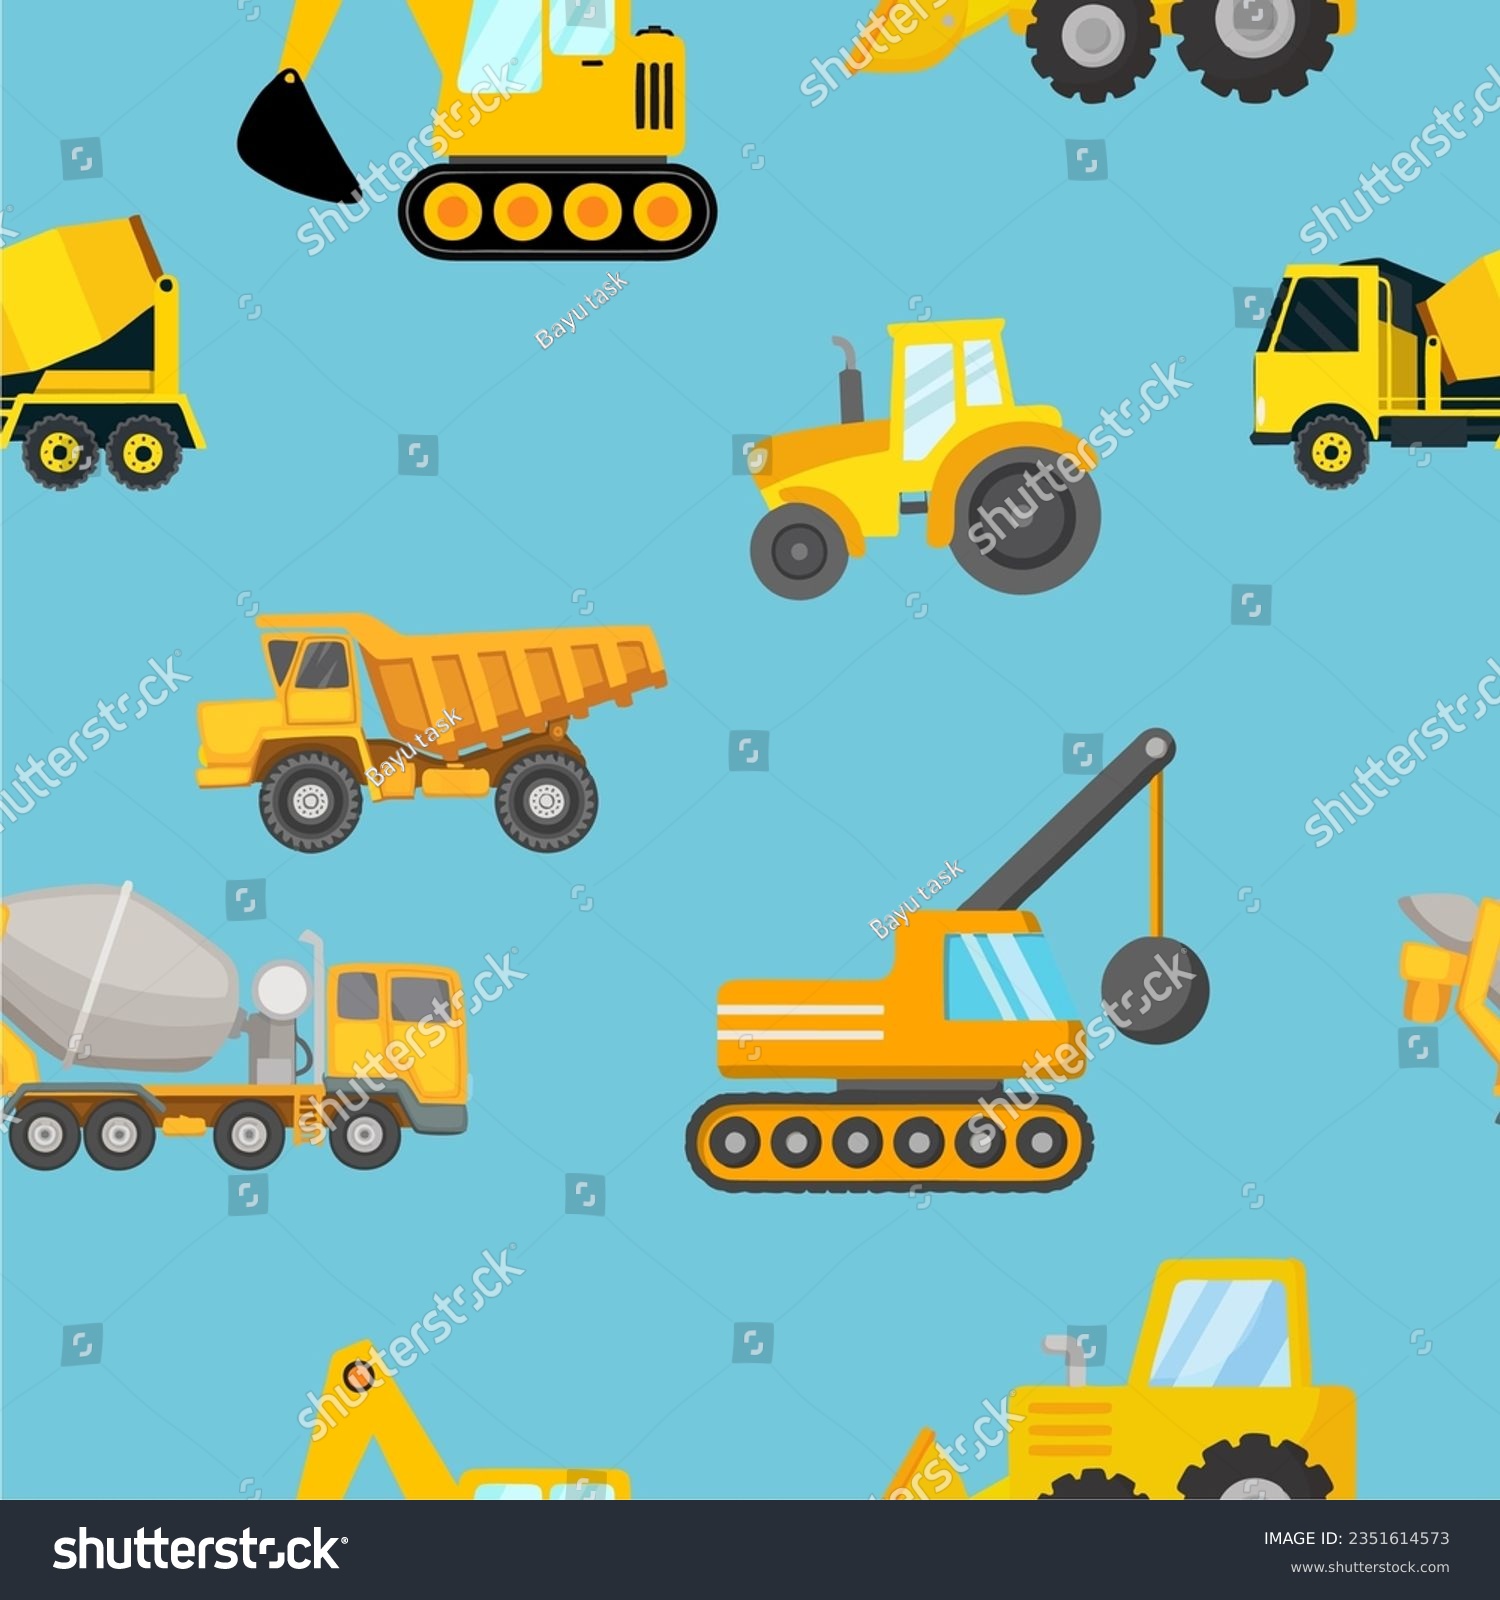 SVG of seamless tractor illustration for textile svg